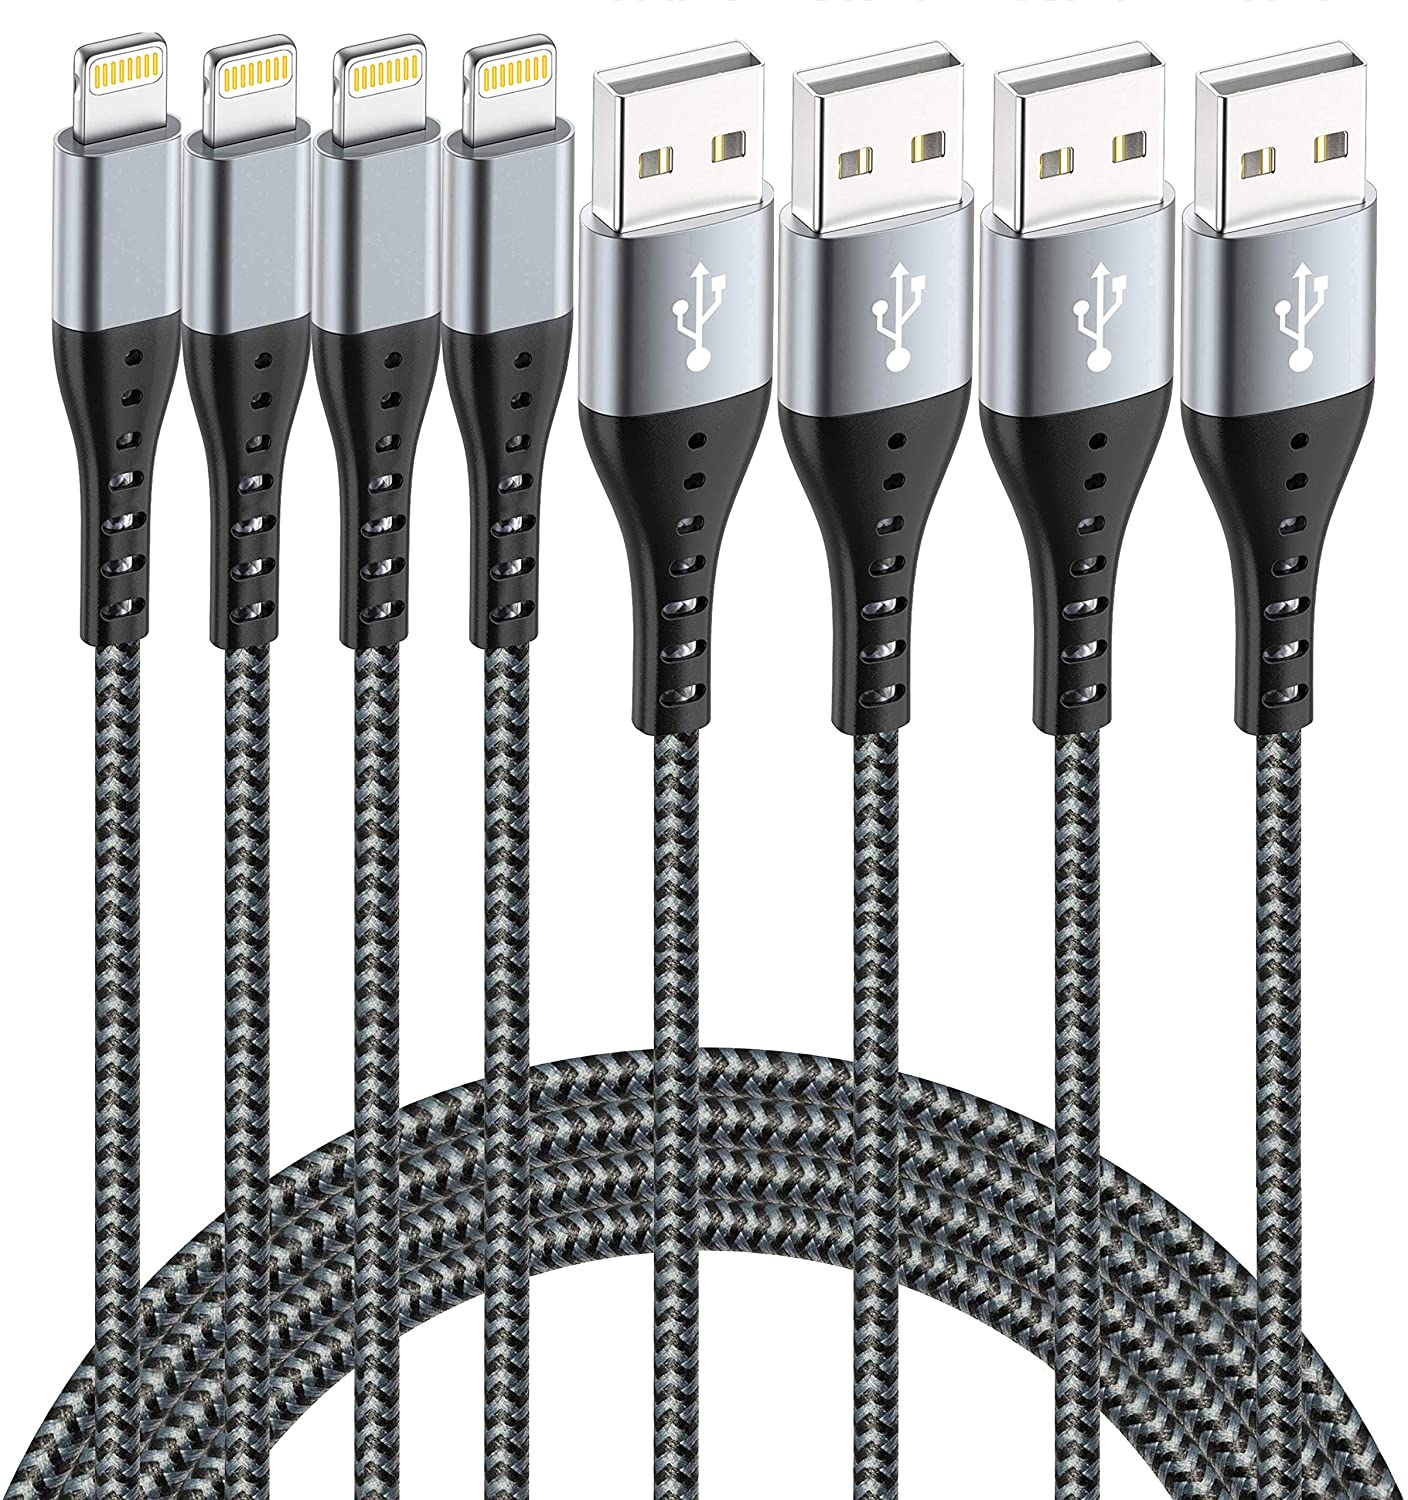 4-pack (10/6/6/3ft) IDISON iPhone Lightning Cables (Mfi Certified Nylon Braided) $6 at Amazon